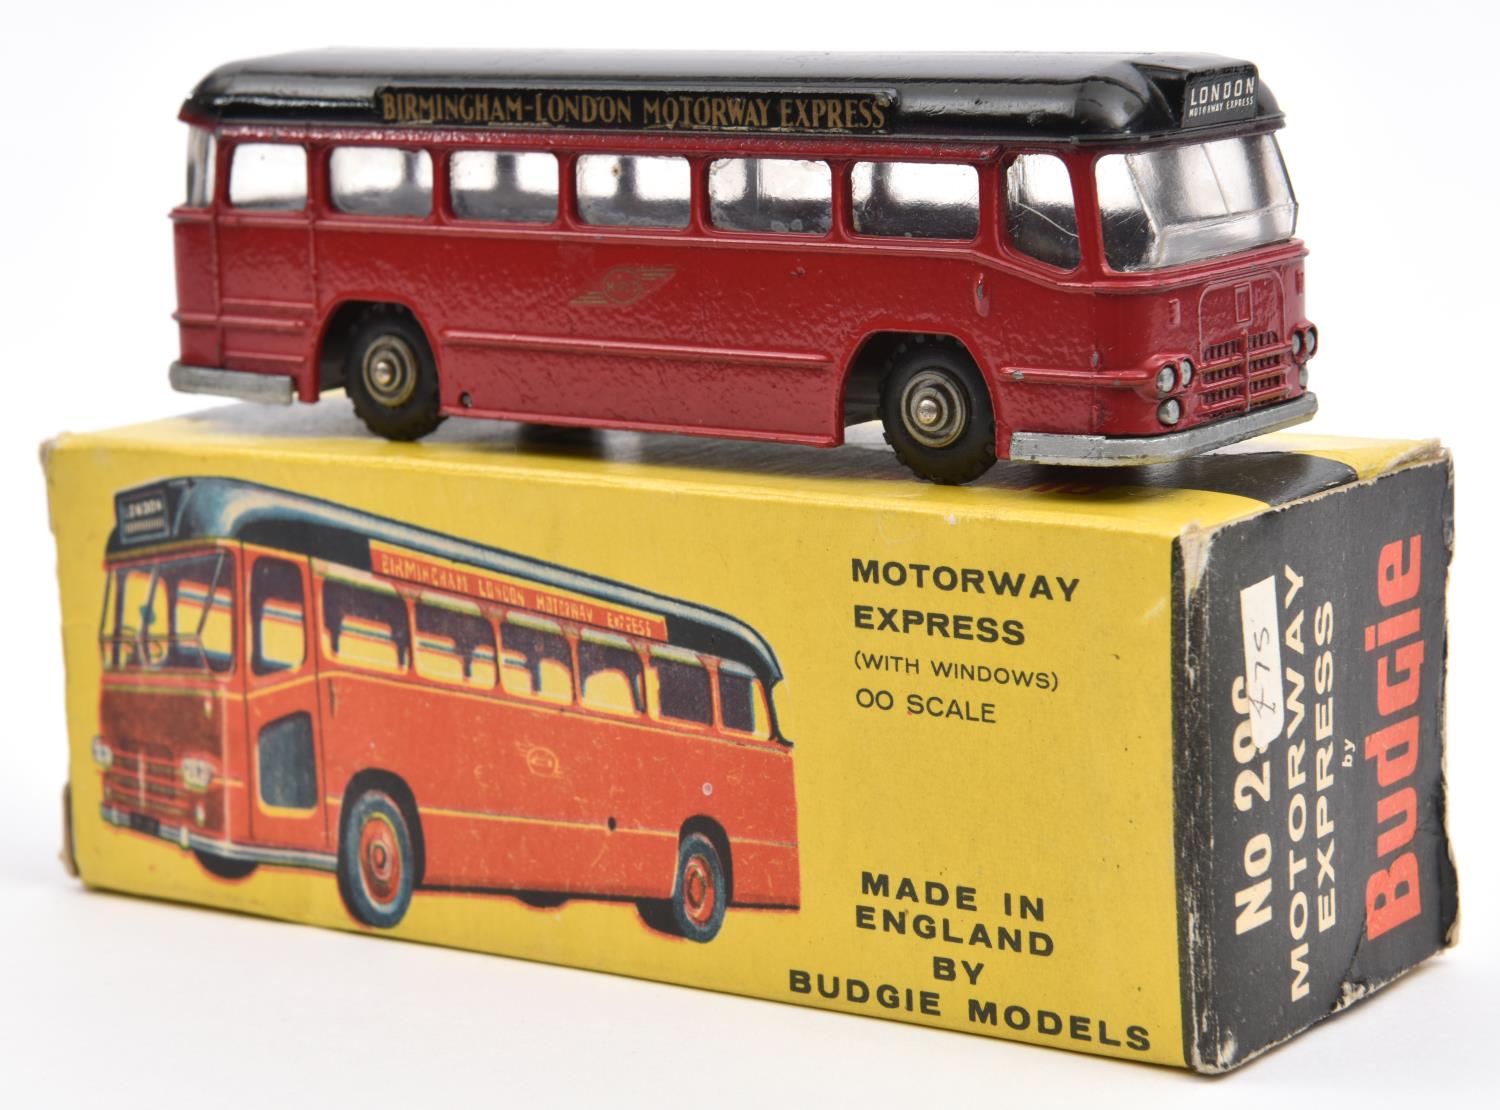 A Budgie Toys Motorway Express (296). In red with black roof, example with 'Birmingham-London